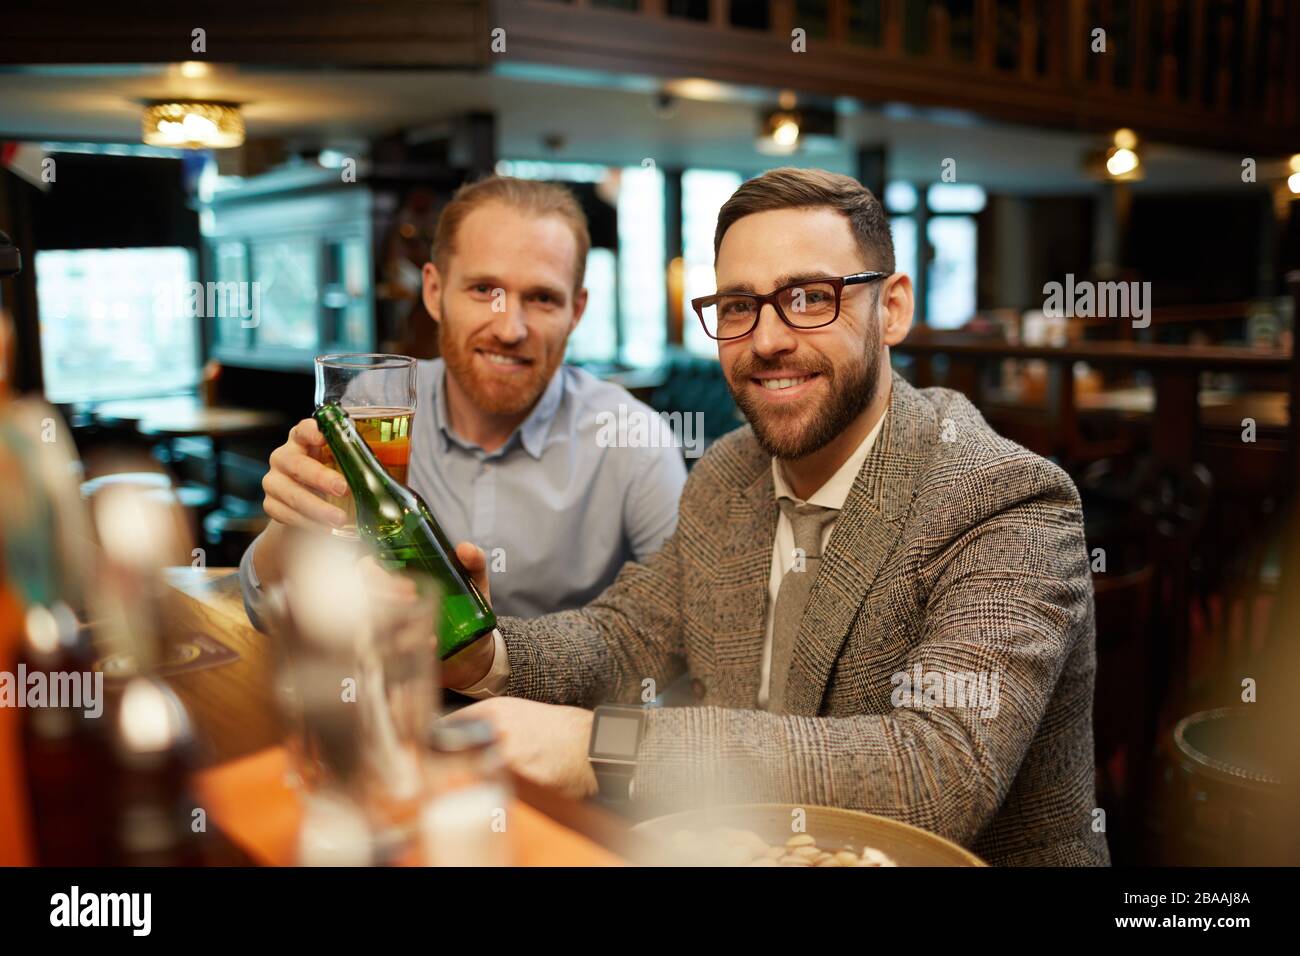 Portrait of two friends smiling at camera while drinking beer at bar counter in the bar Stock Photo